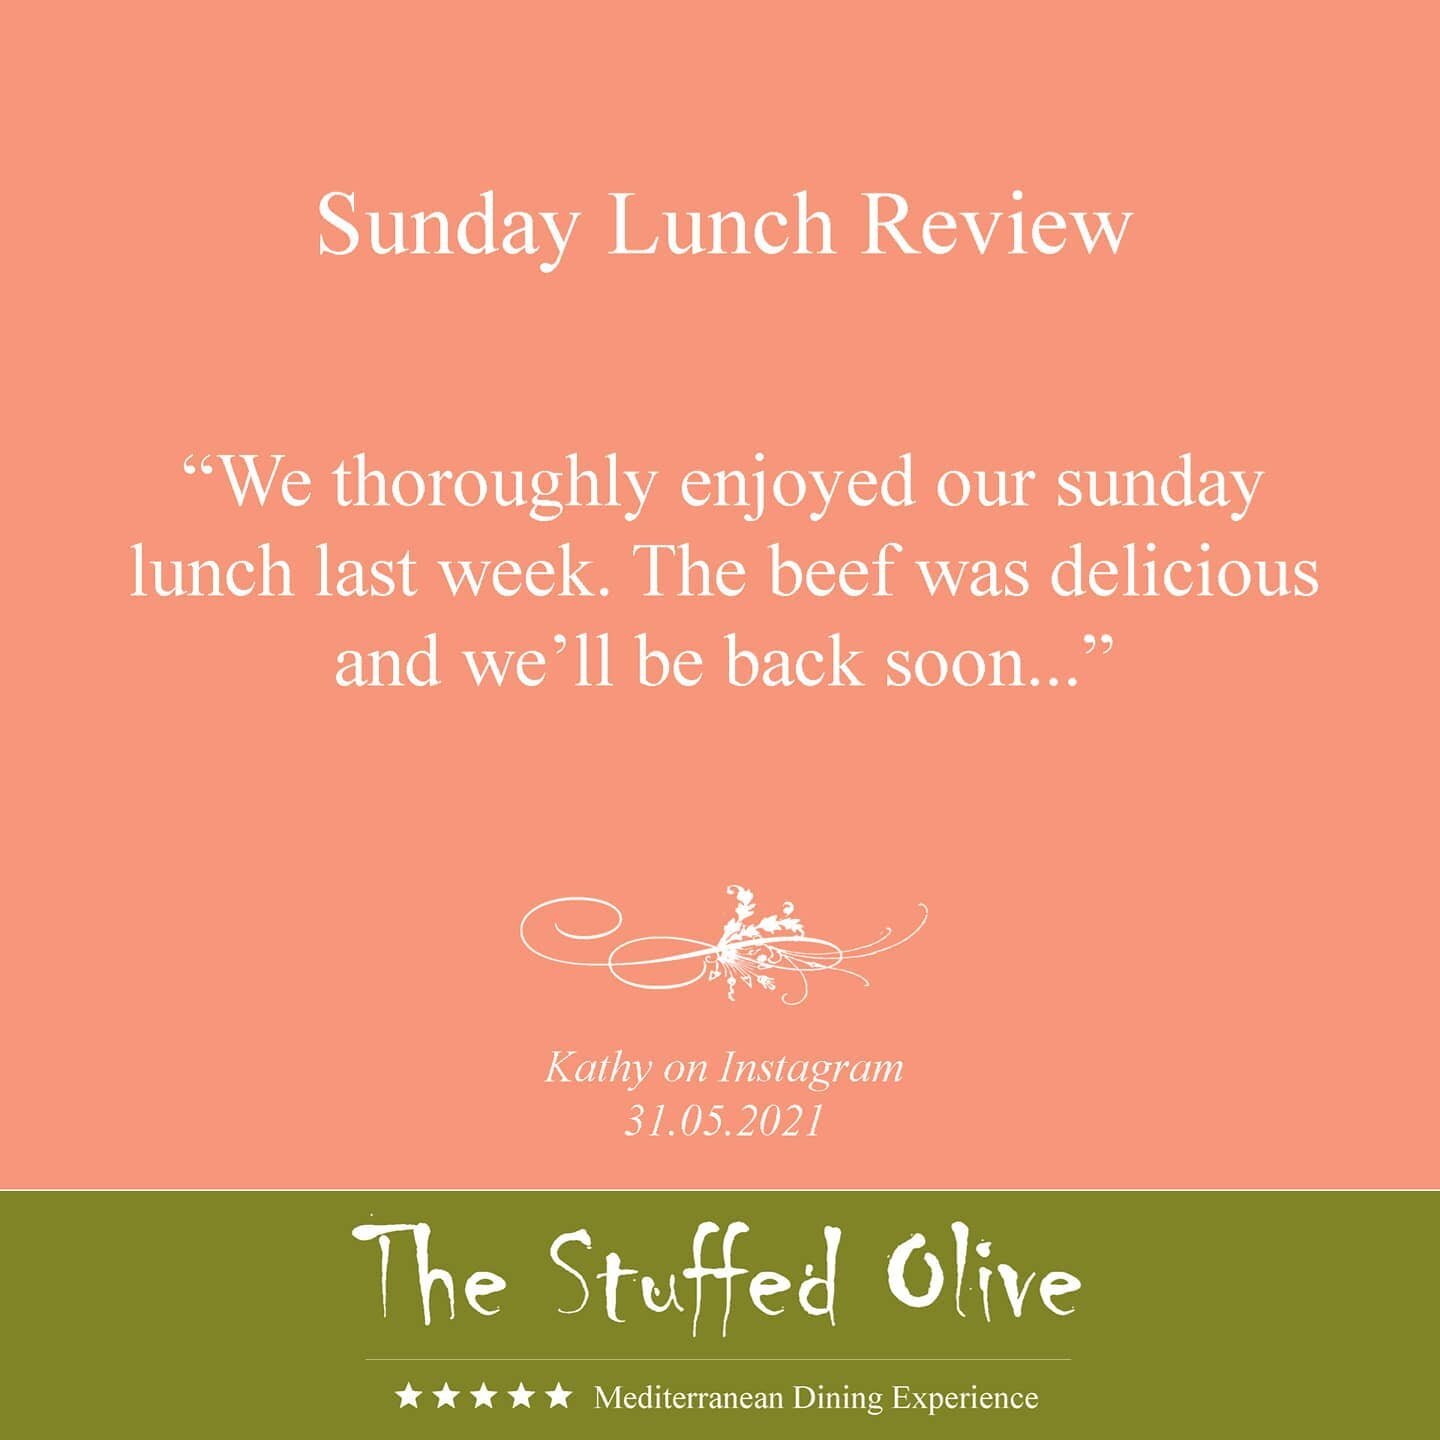 A lovely review of our Sunday lunches from a very happy customer - thank you @lallyklals 

#customerreviews #stuffedolive #northamptonshire #northantsrestaurants #northamptonfoodie #northantslife #northampton #foodreview #sundayroast #roastbeef